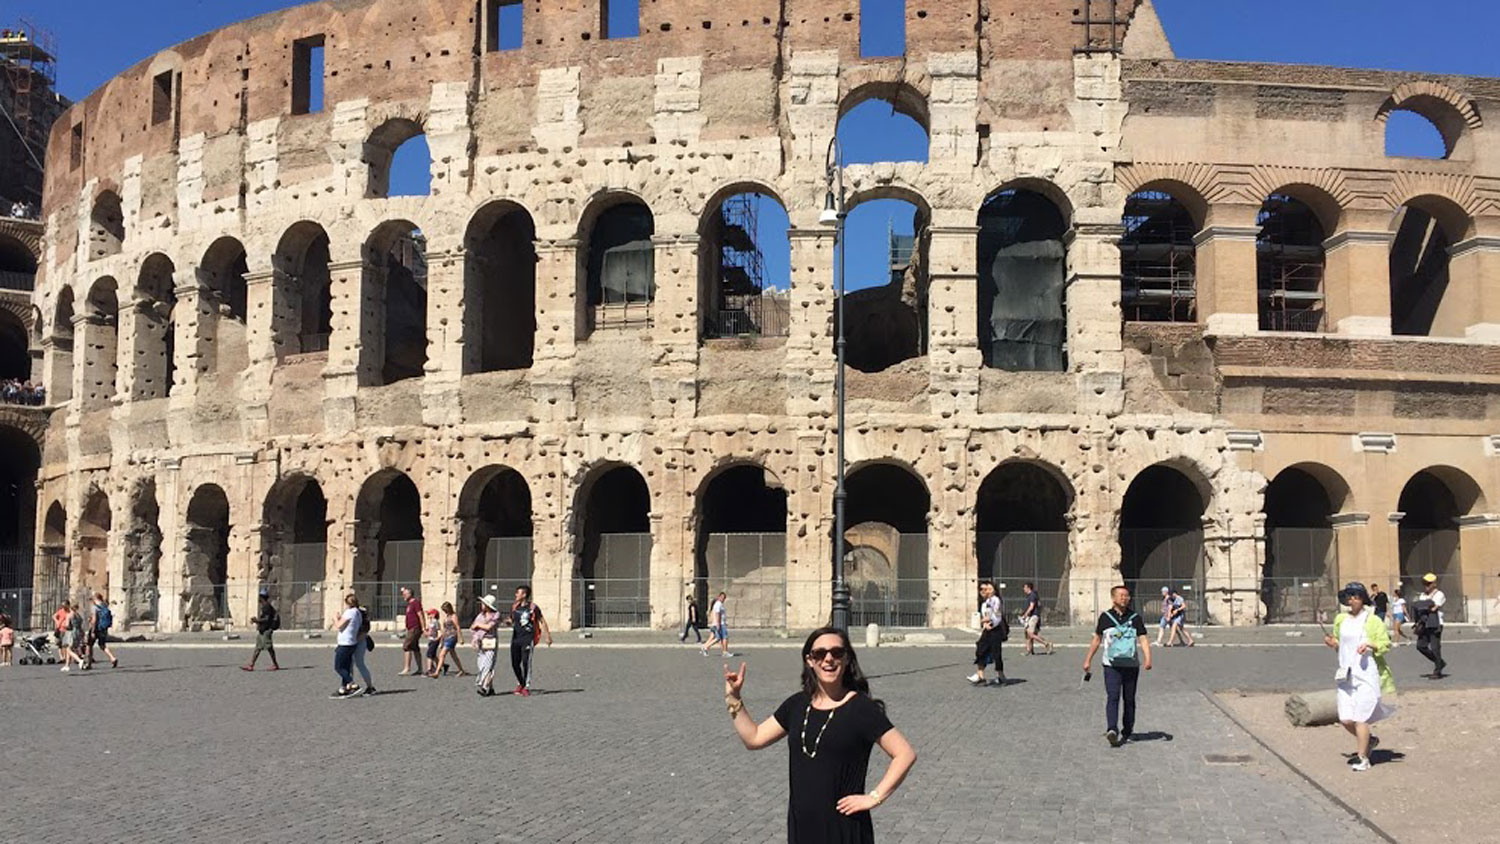 College of Education student Kelsi Harris poses in front of the Colosseum in Rome.